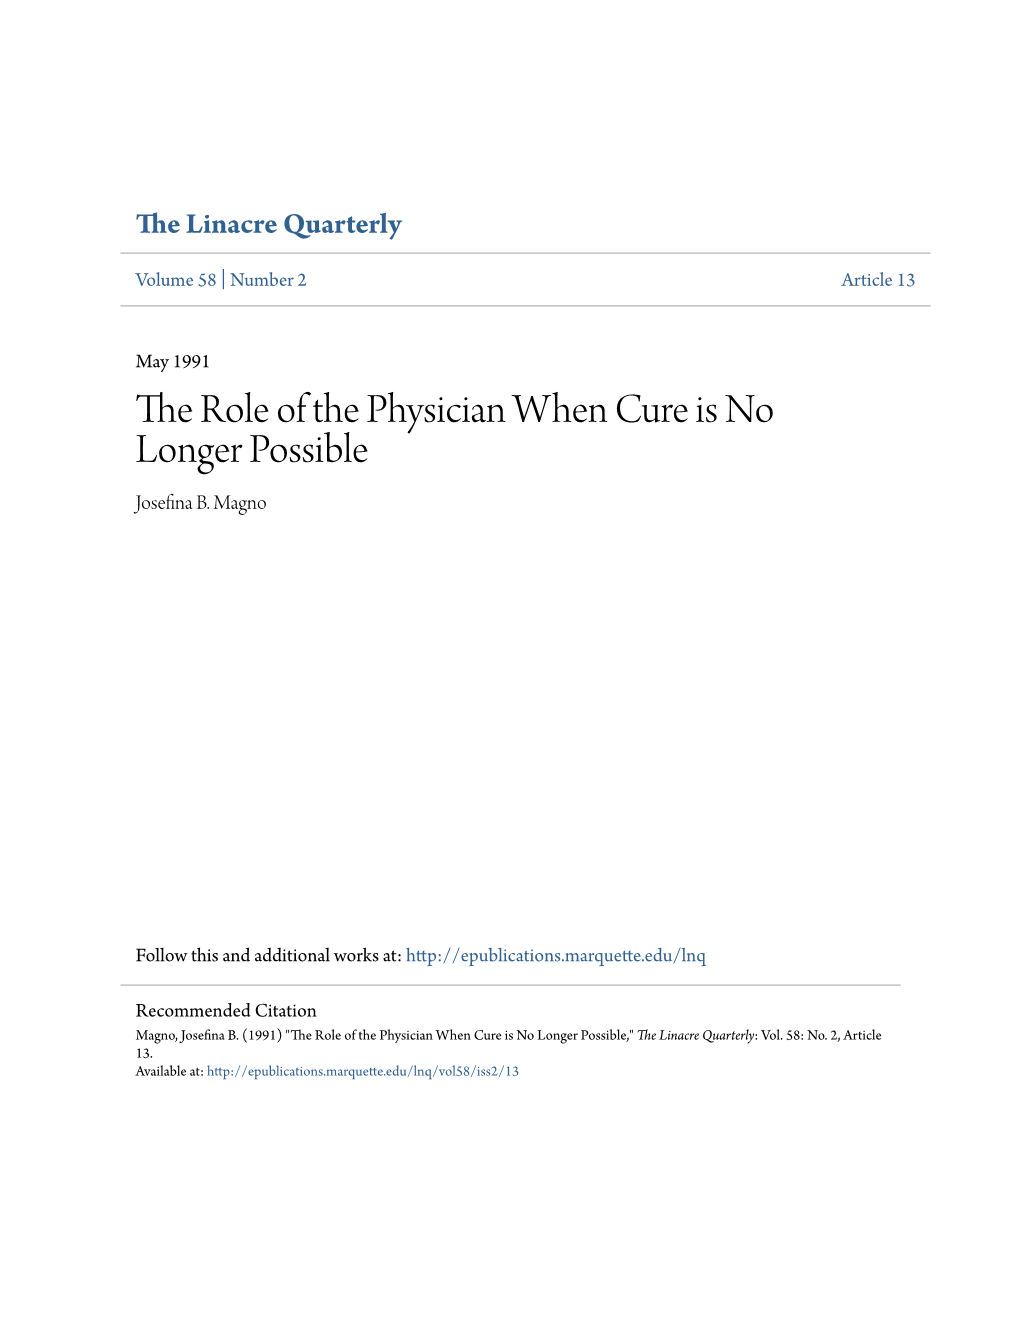 The Role of the Physician When Cure Is No Longer Possible Josefina B